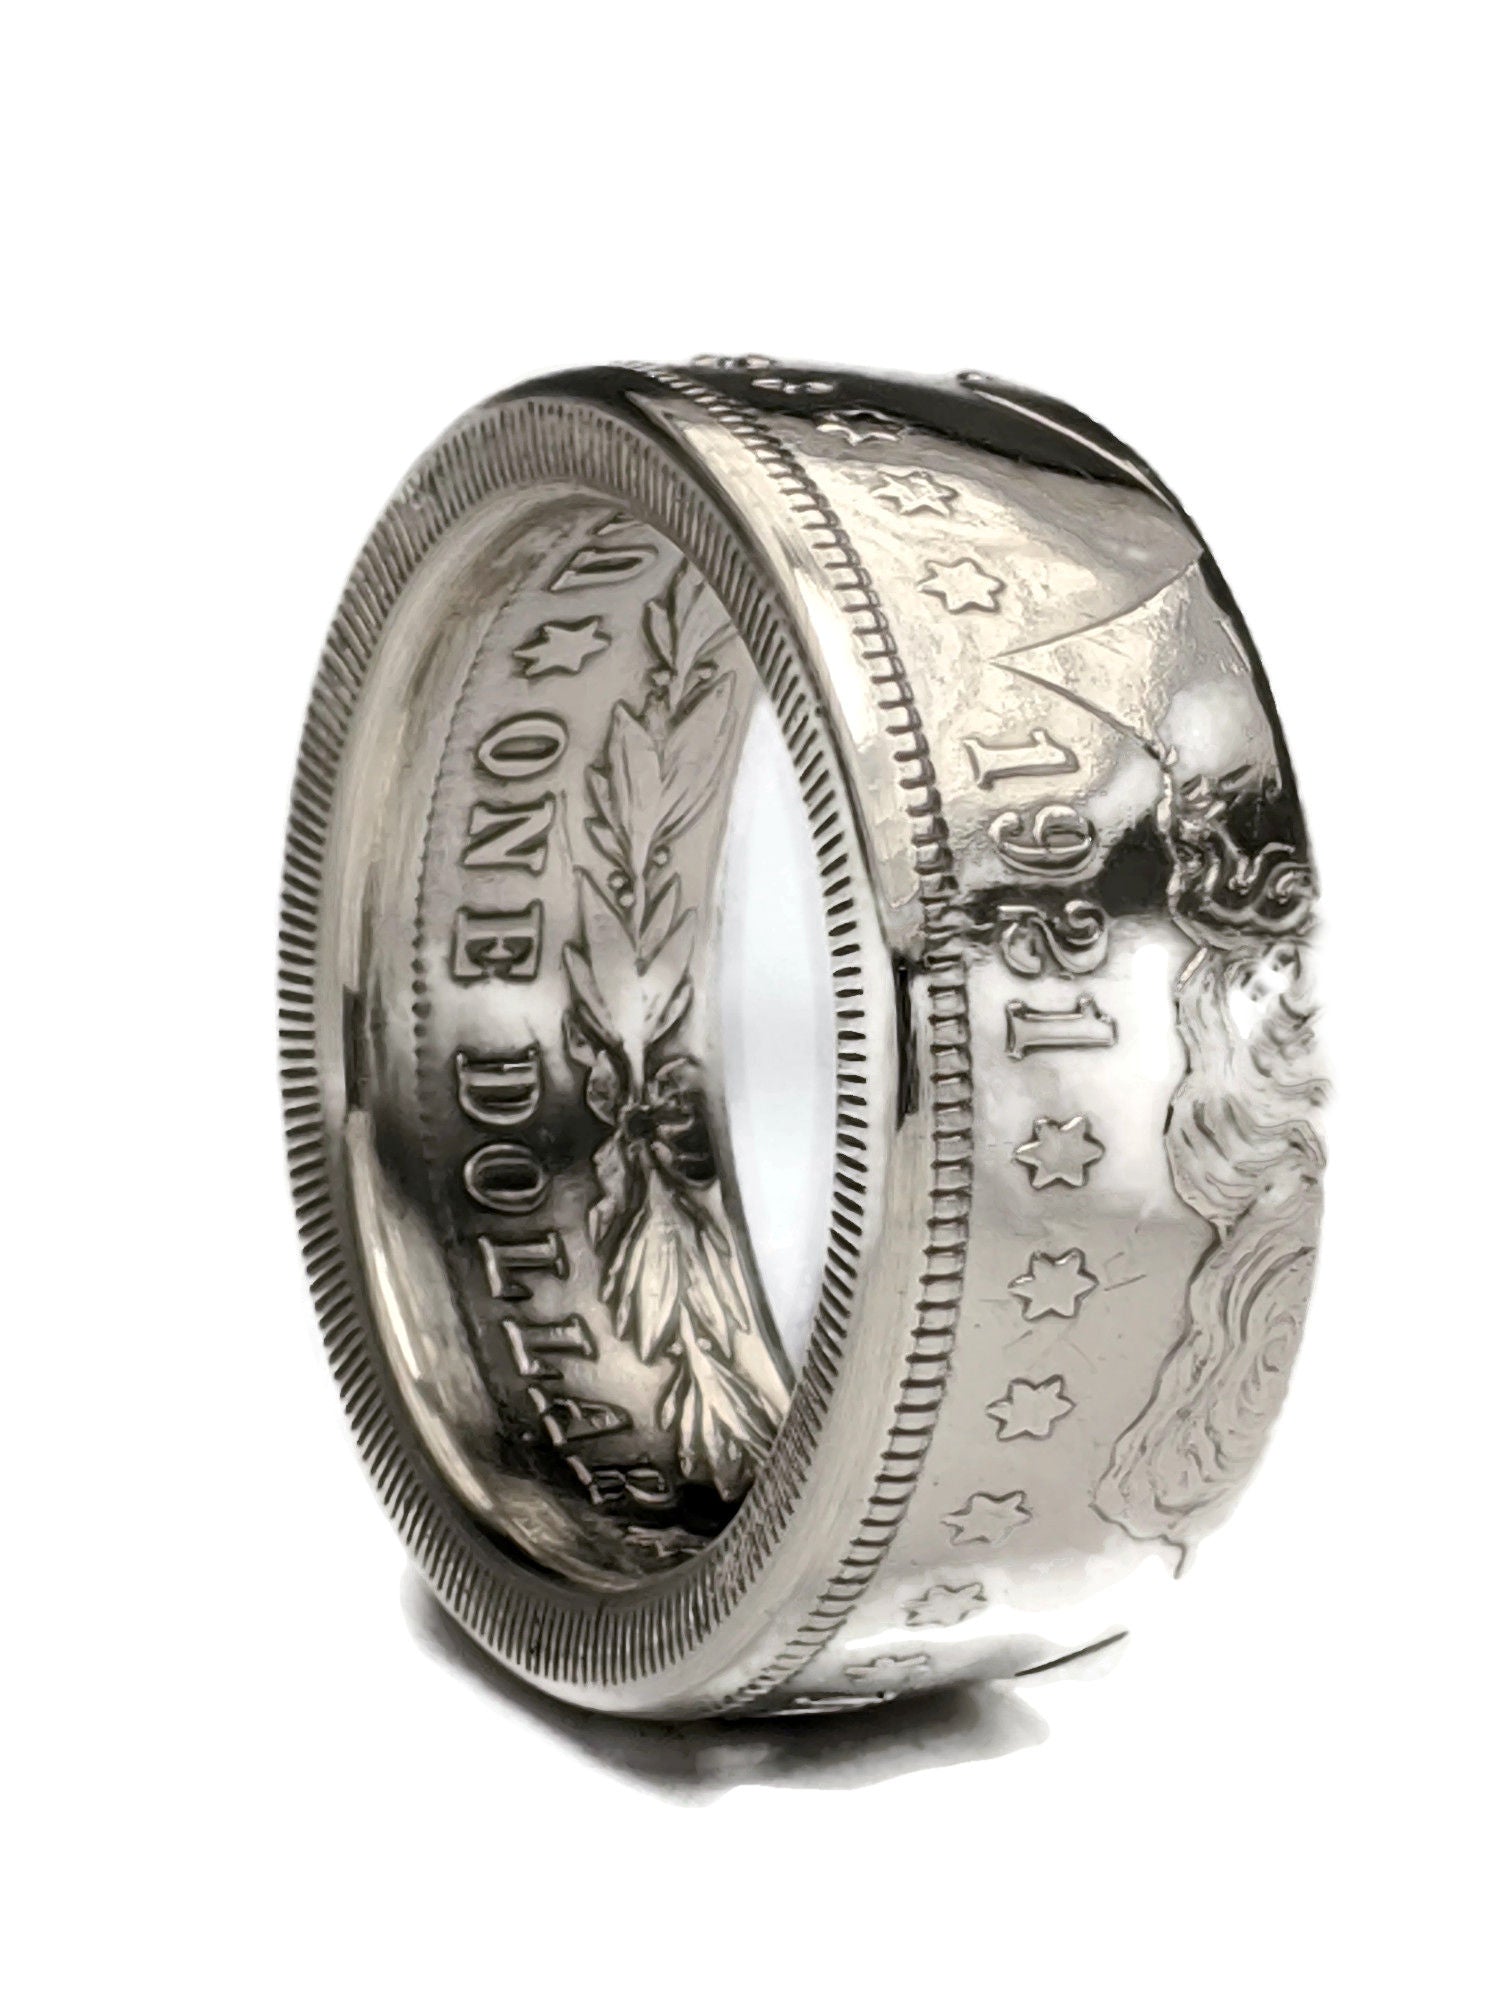 Morgan Silver Dollar Coin Handcrafted Ring Silver Plated 